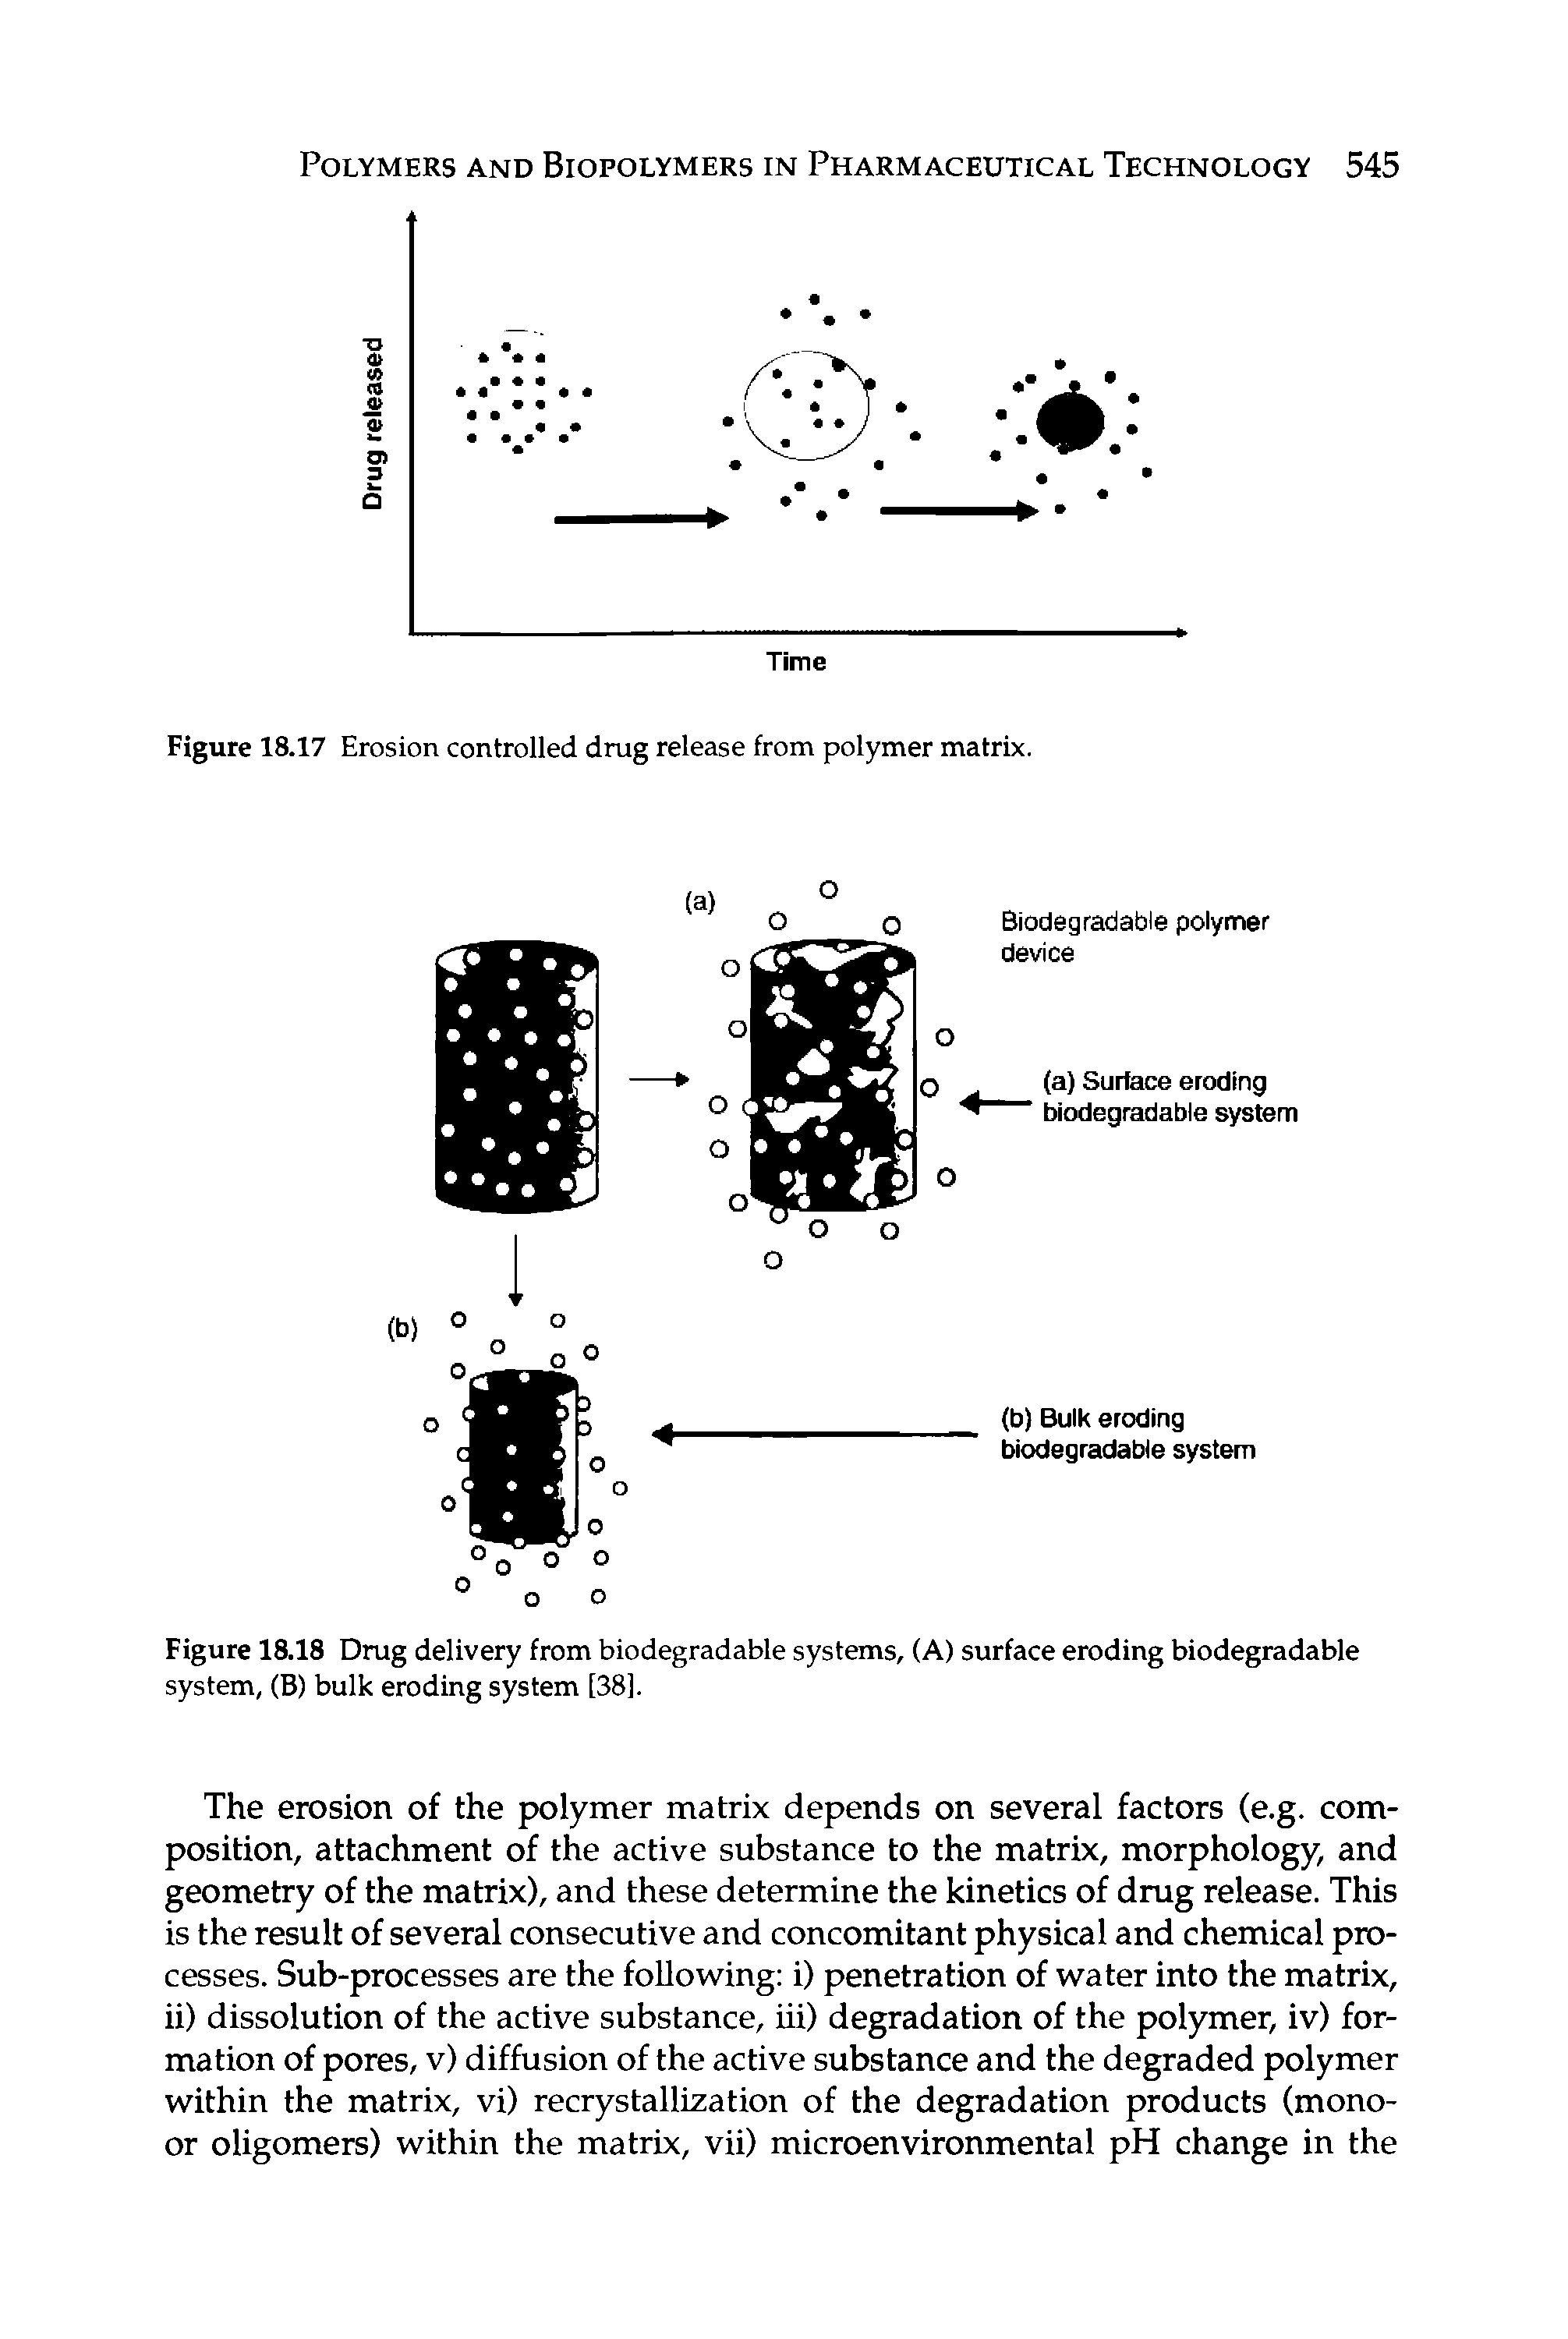 Figure 18.18 Drug delivery from biodegradable systems, (A) surface eroding biodegradable system, (B) bulk eroding system [38].